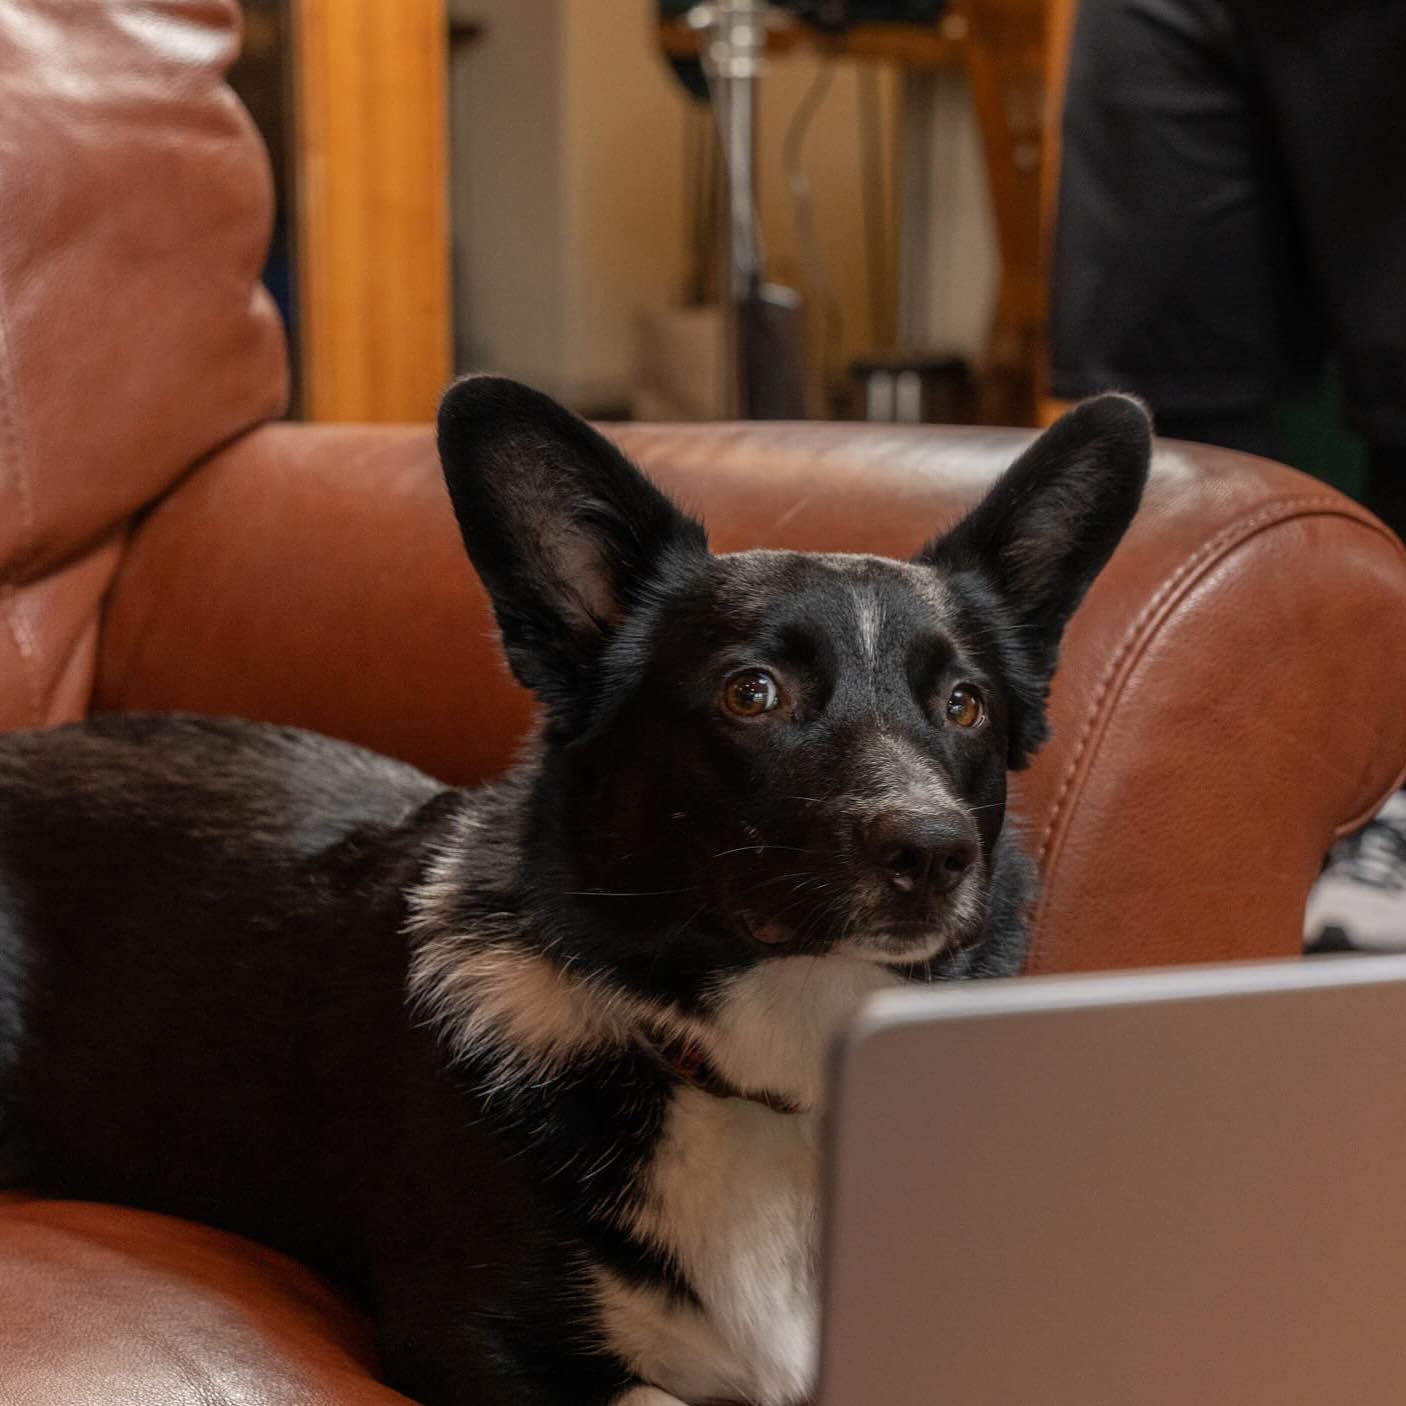 Looks like Skully got his paws on our latest blog 👀

Check out what we had to say about tips on how to name a business on our website.